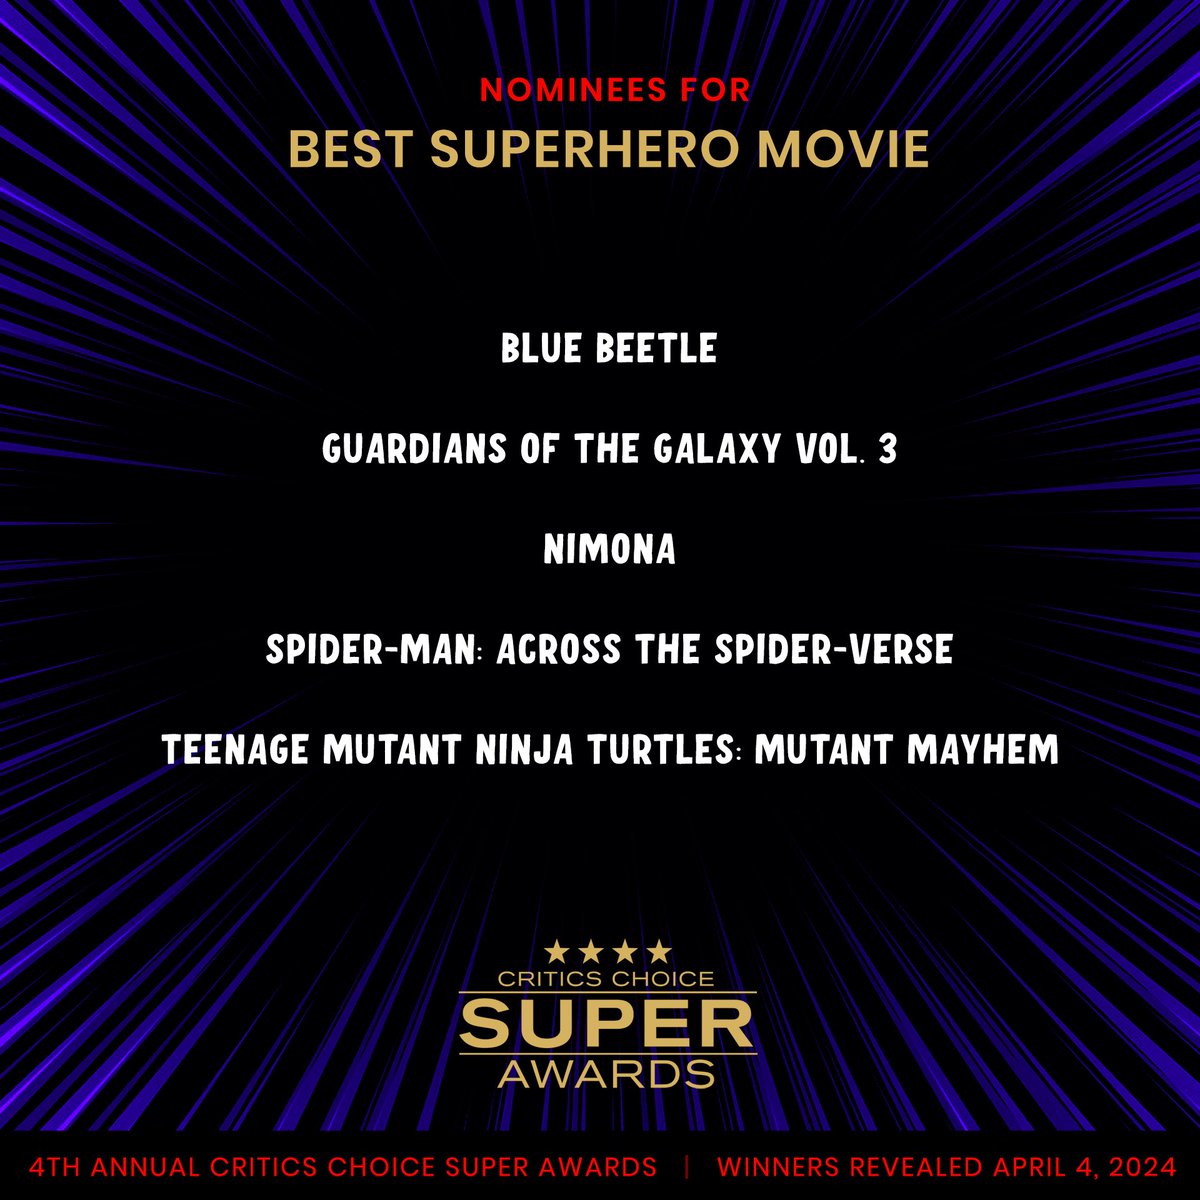 Congratulations to our Critics Choice Super Awards 'BEST SUPERHERO MOVIE' nominees! Winners will be announced April 4th, 2024.⭐️⭐️⭐️⭐️ #CriticsChoice #CCSuperAwards